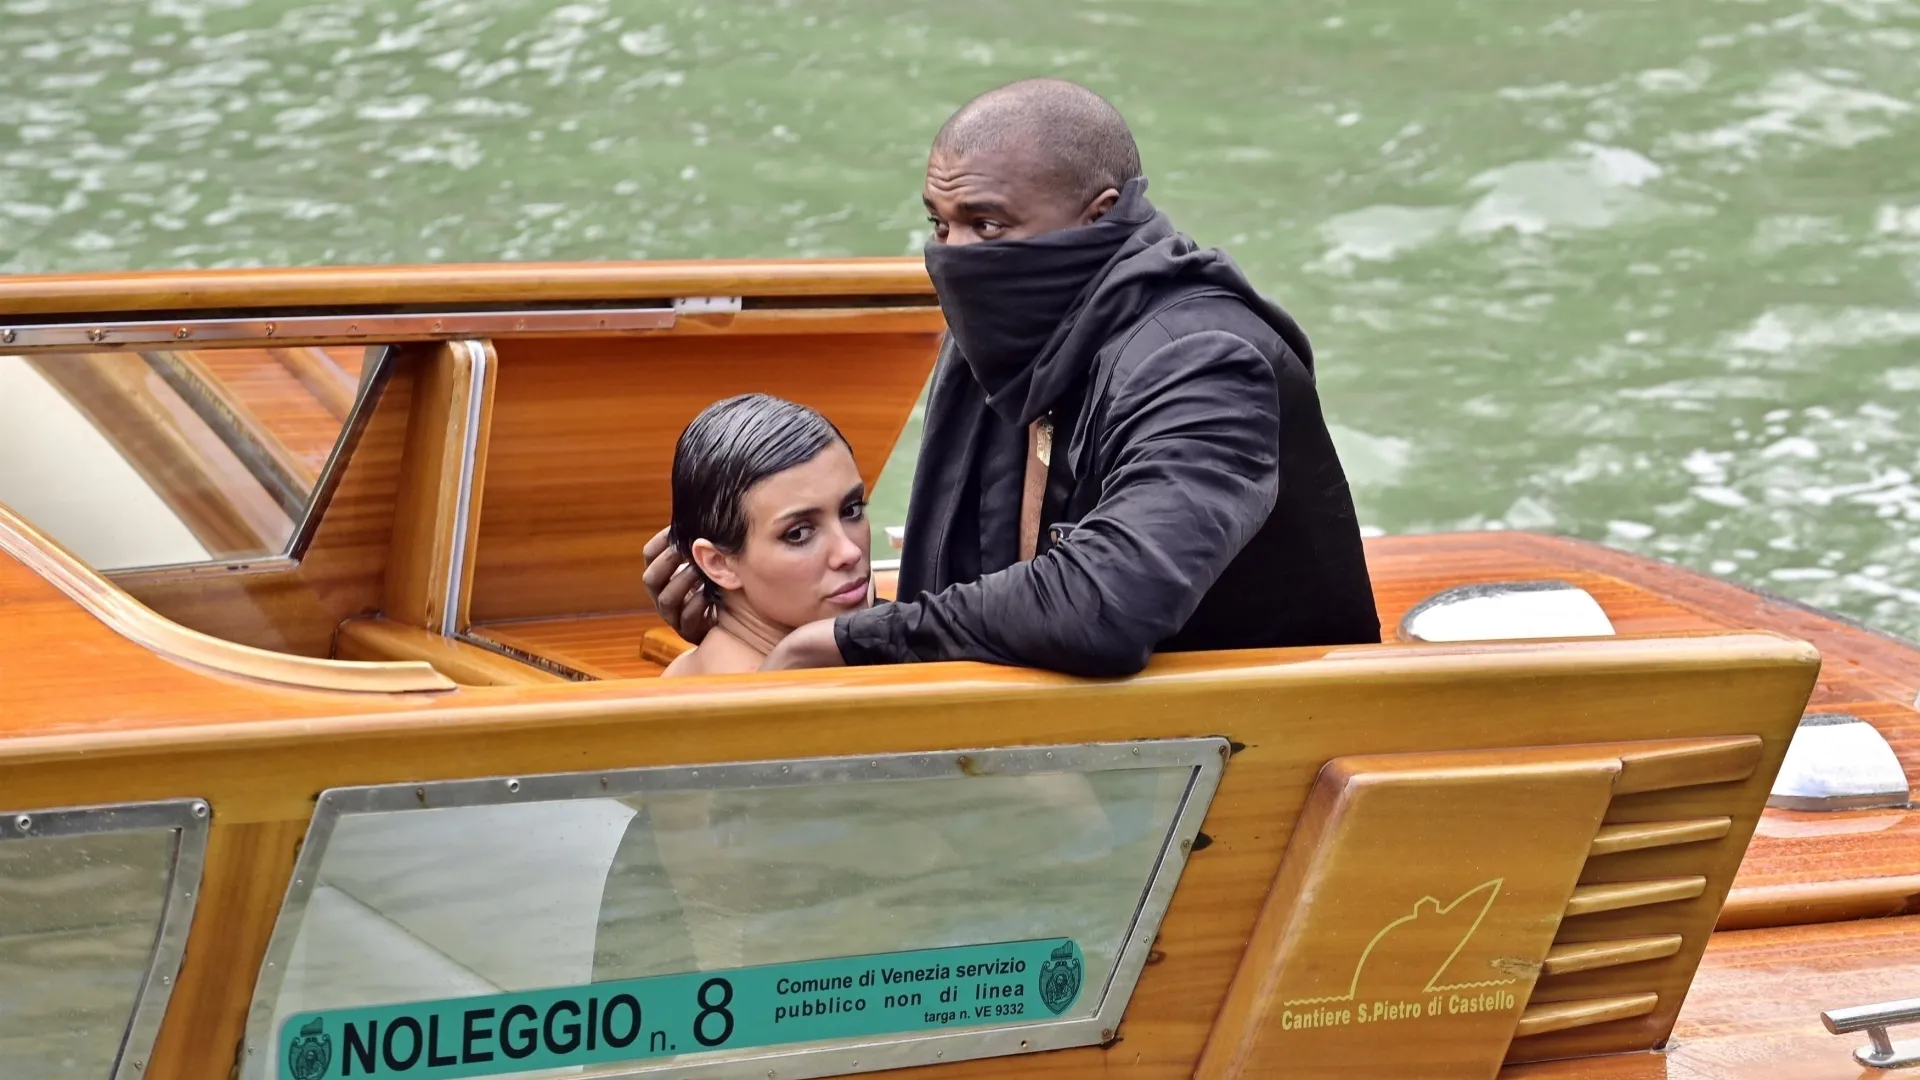 Not long ago, the couple was enjoying each other's company in Venice